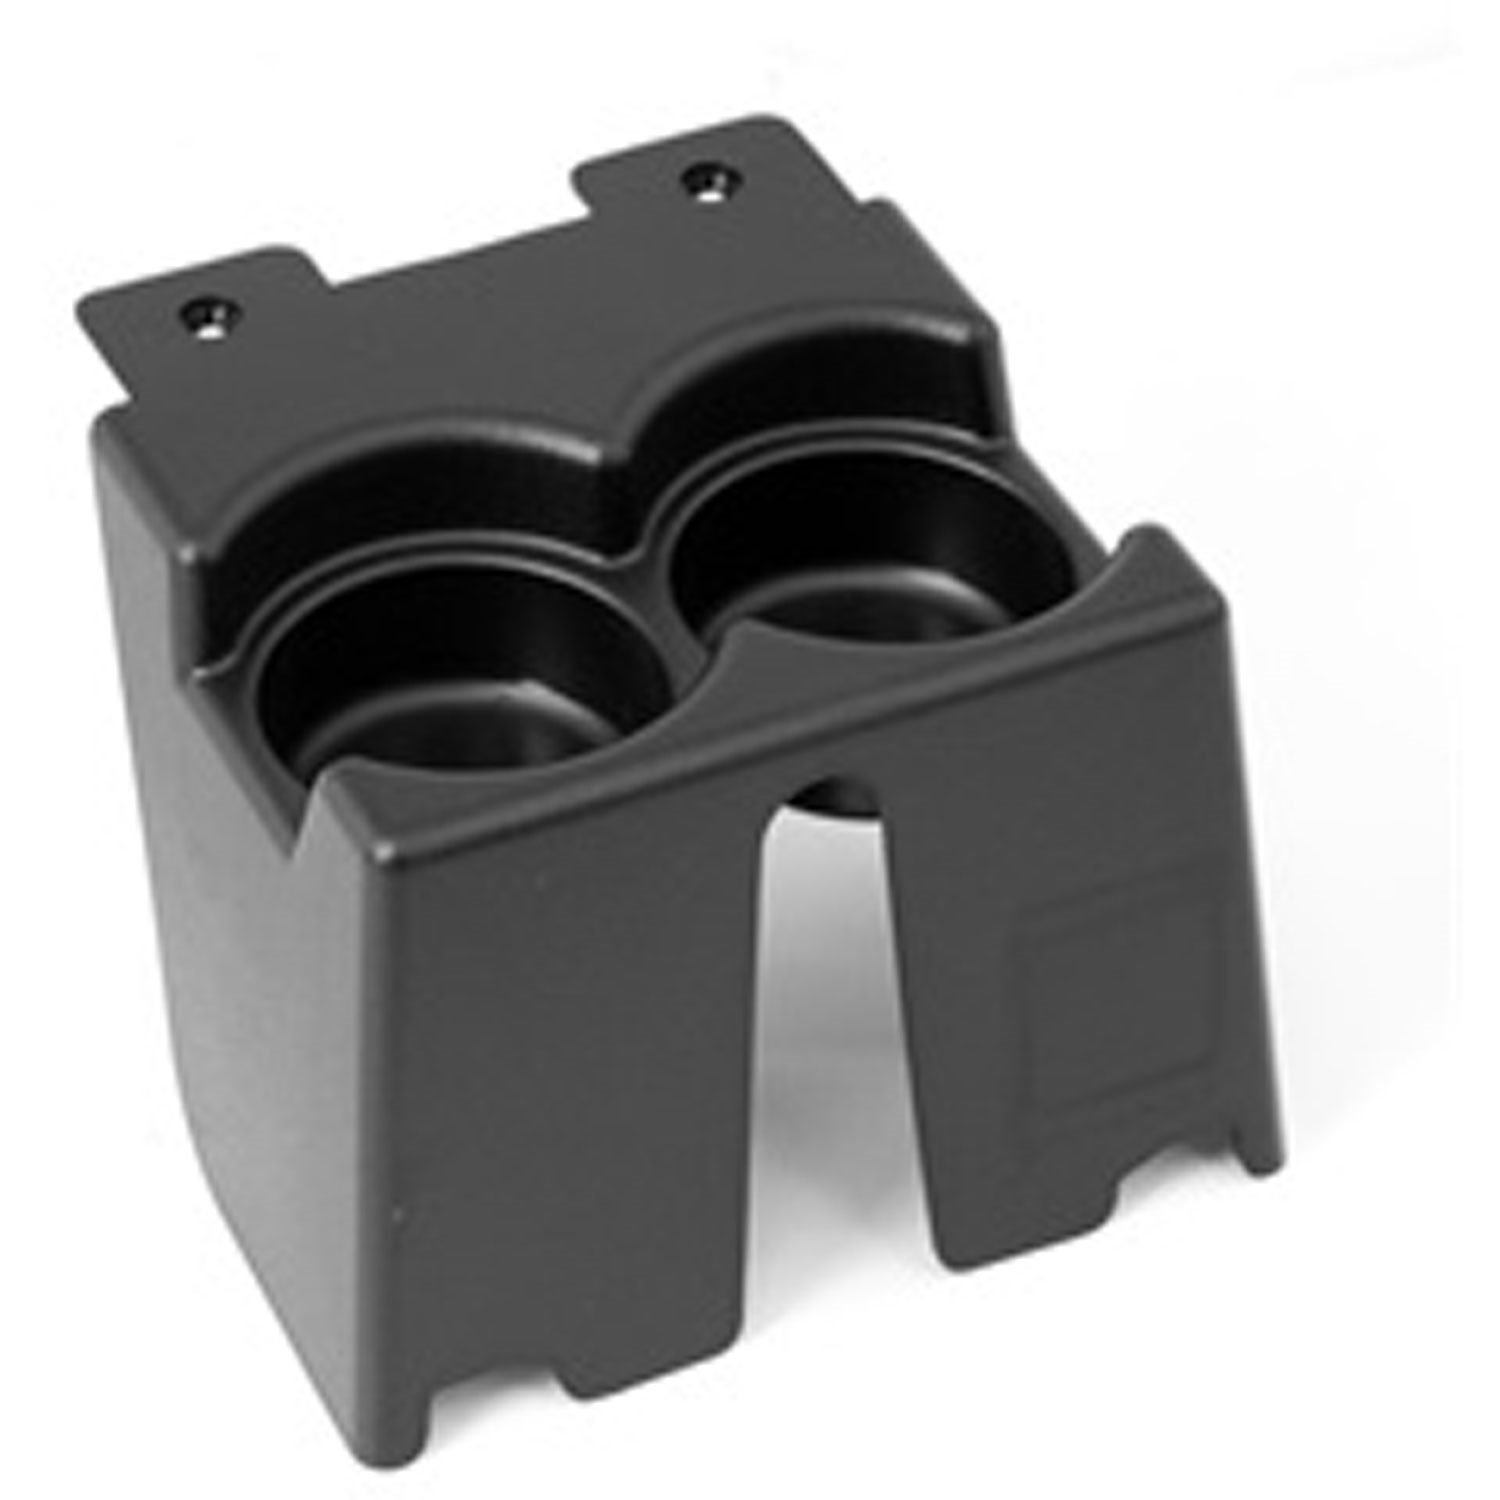 This black plastic dual cup holder from Omix-ADA